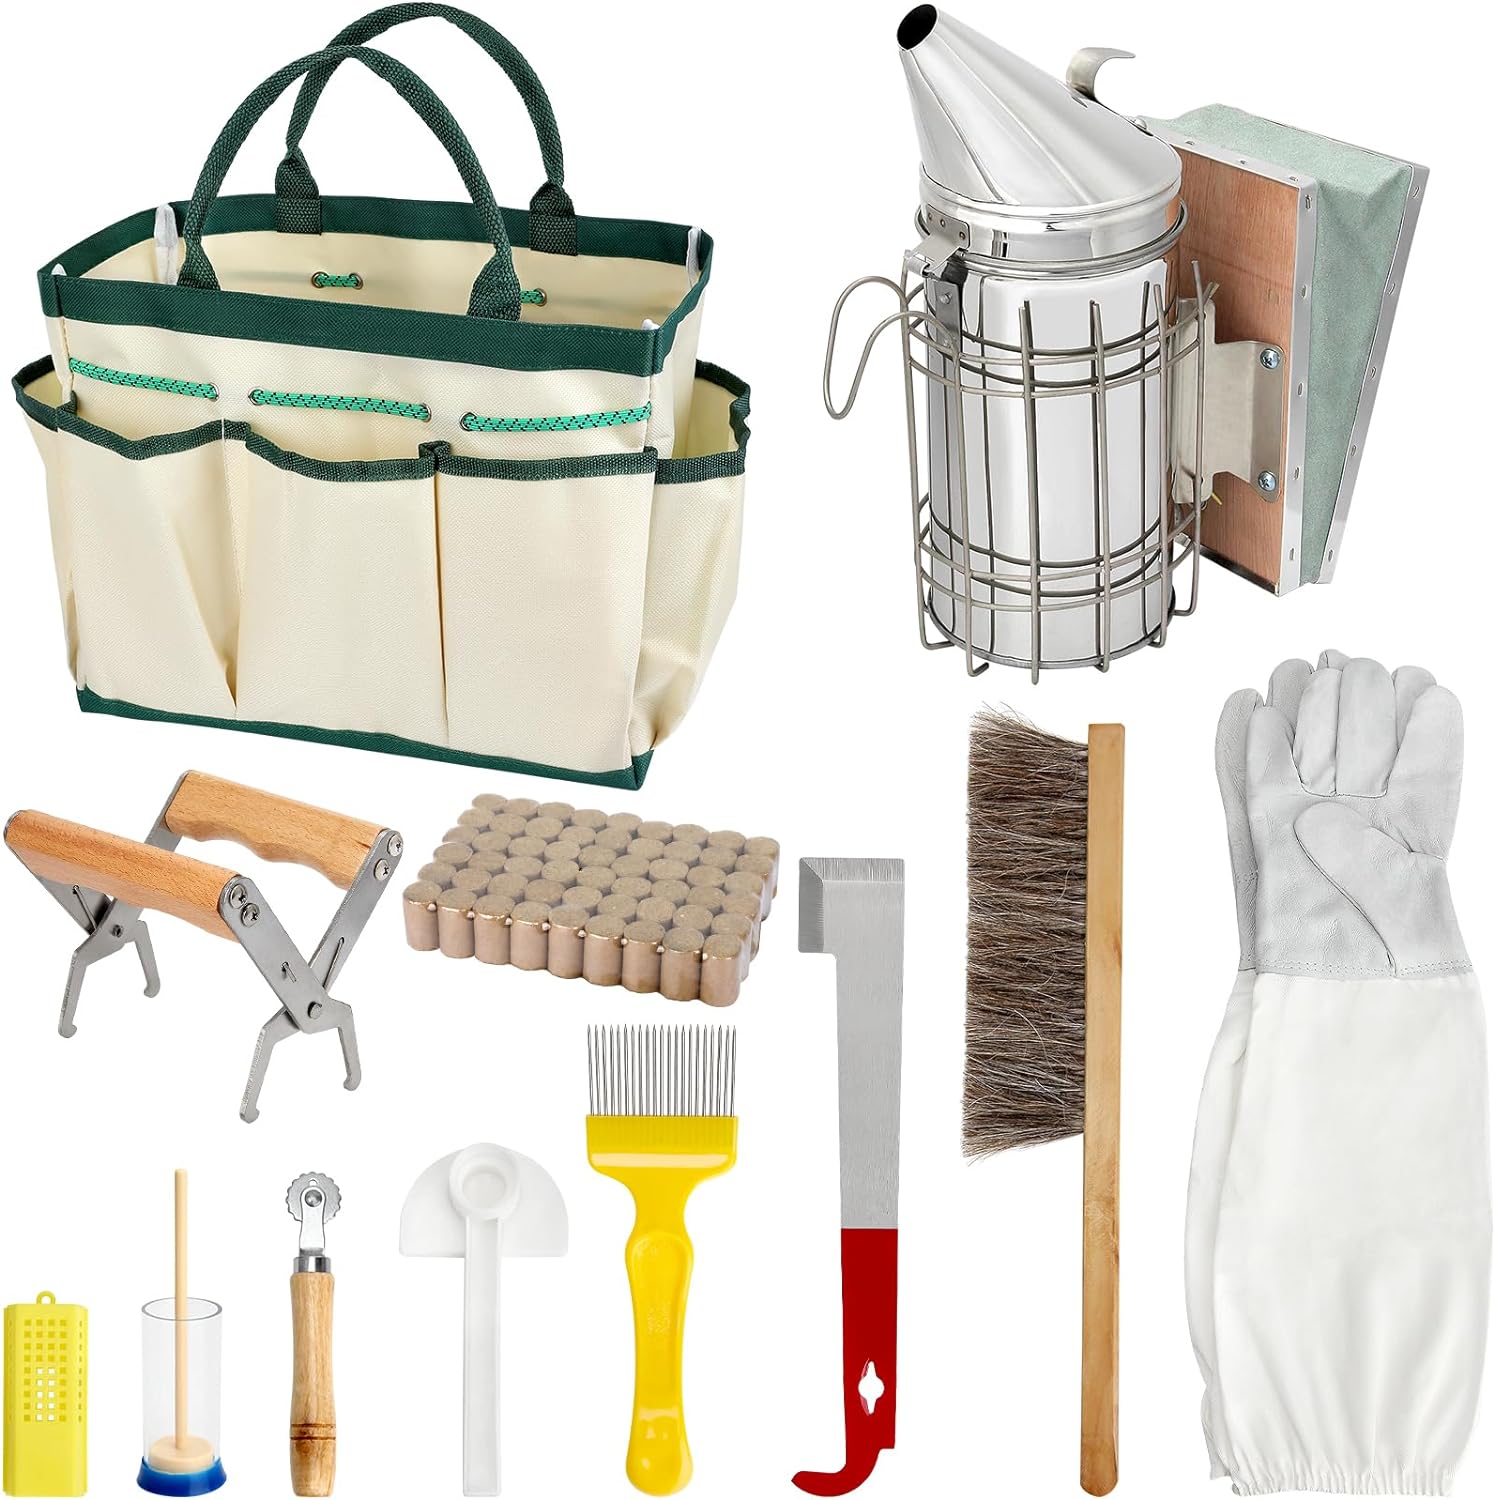 Blisstime 12 PCS Bee Keeping Starter Kit Beekeeping Supplies, Bee Keeping Supplies-All Beekeeping Tools Bee Supplies and Equipment, Honey Bee Hive Tools Bee Smoker Kit for Beginners and Professionals